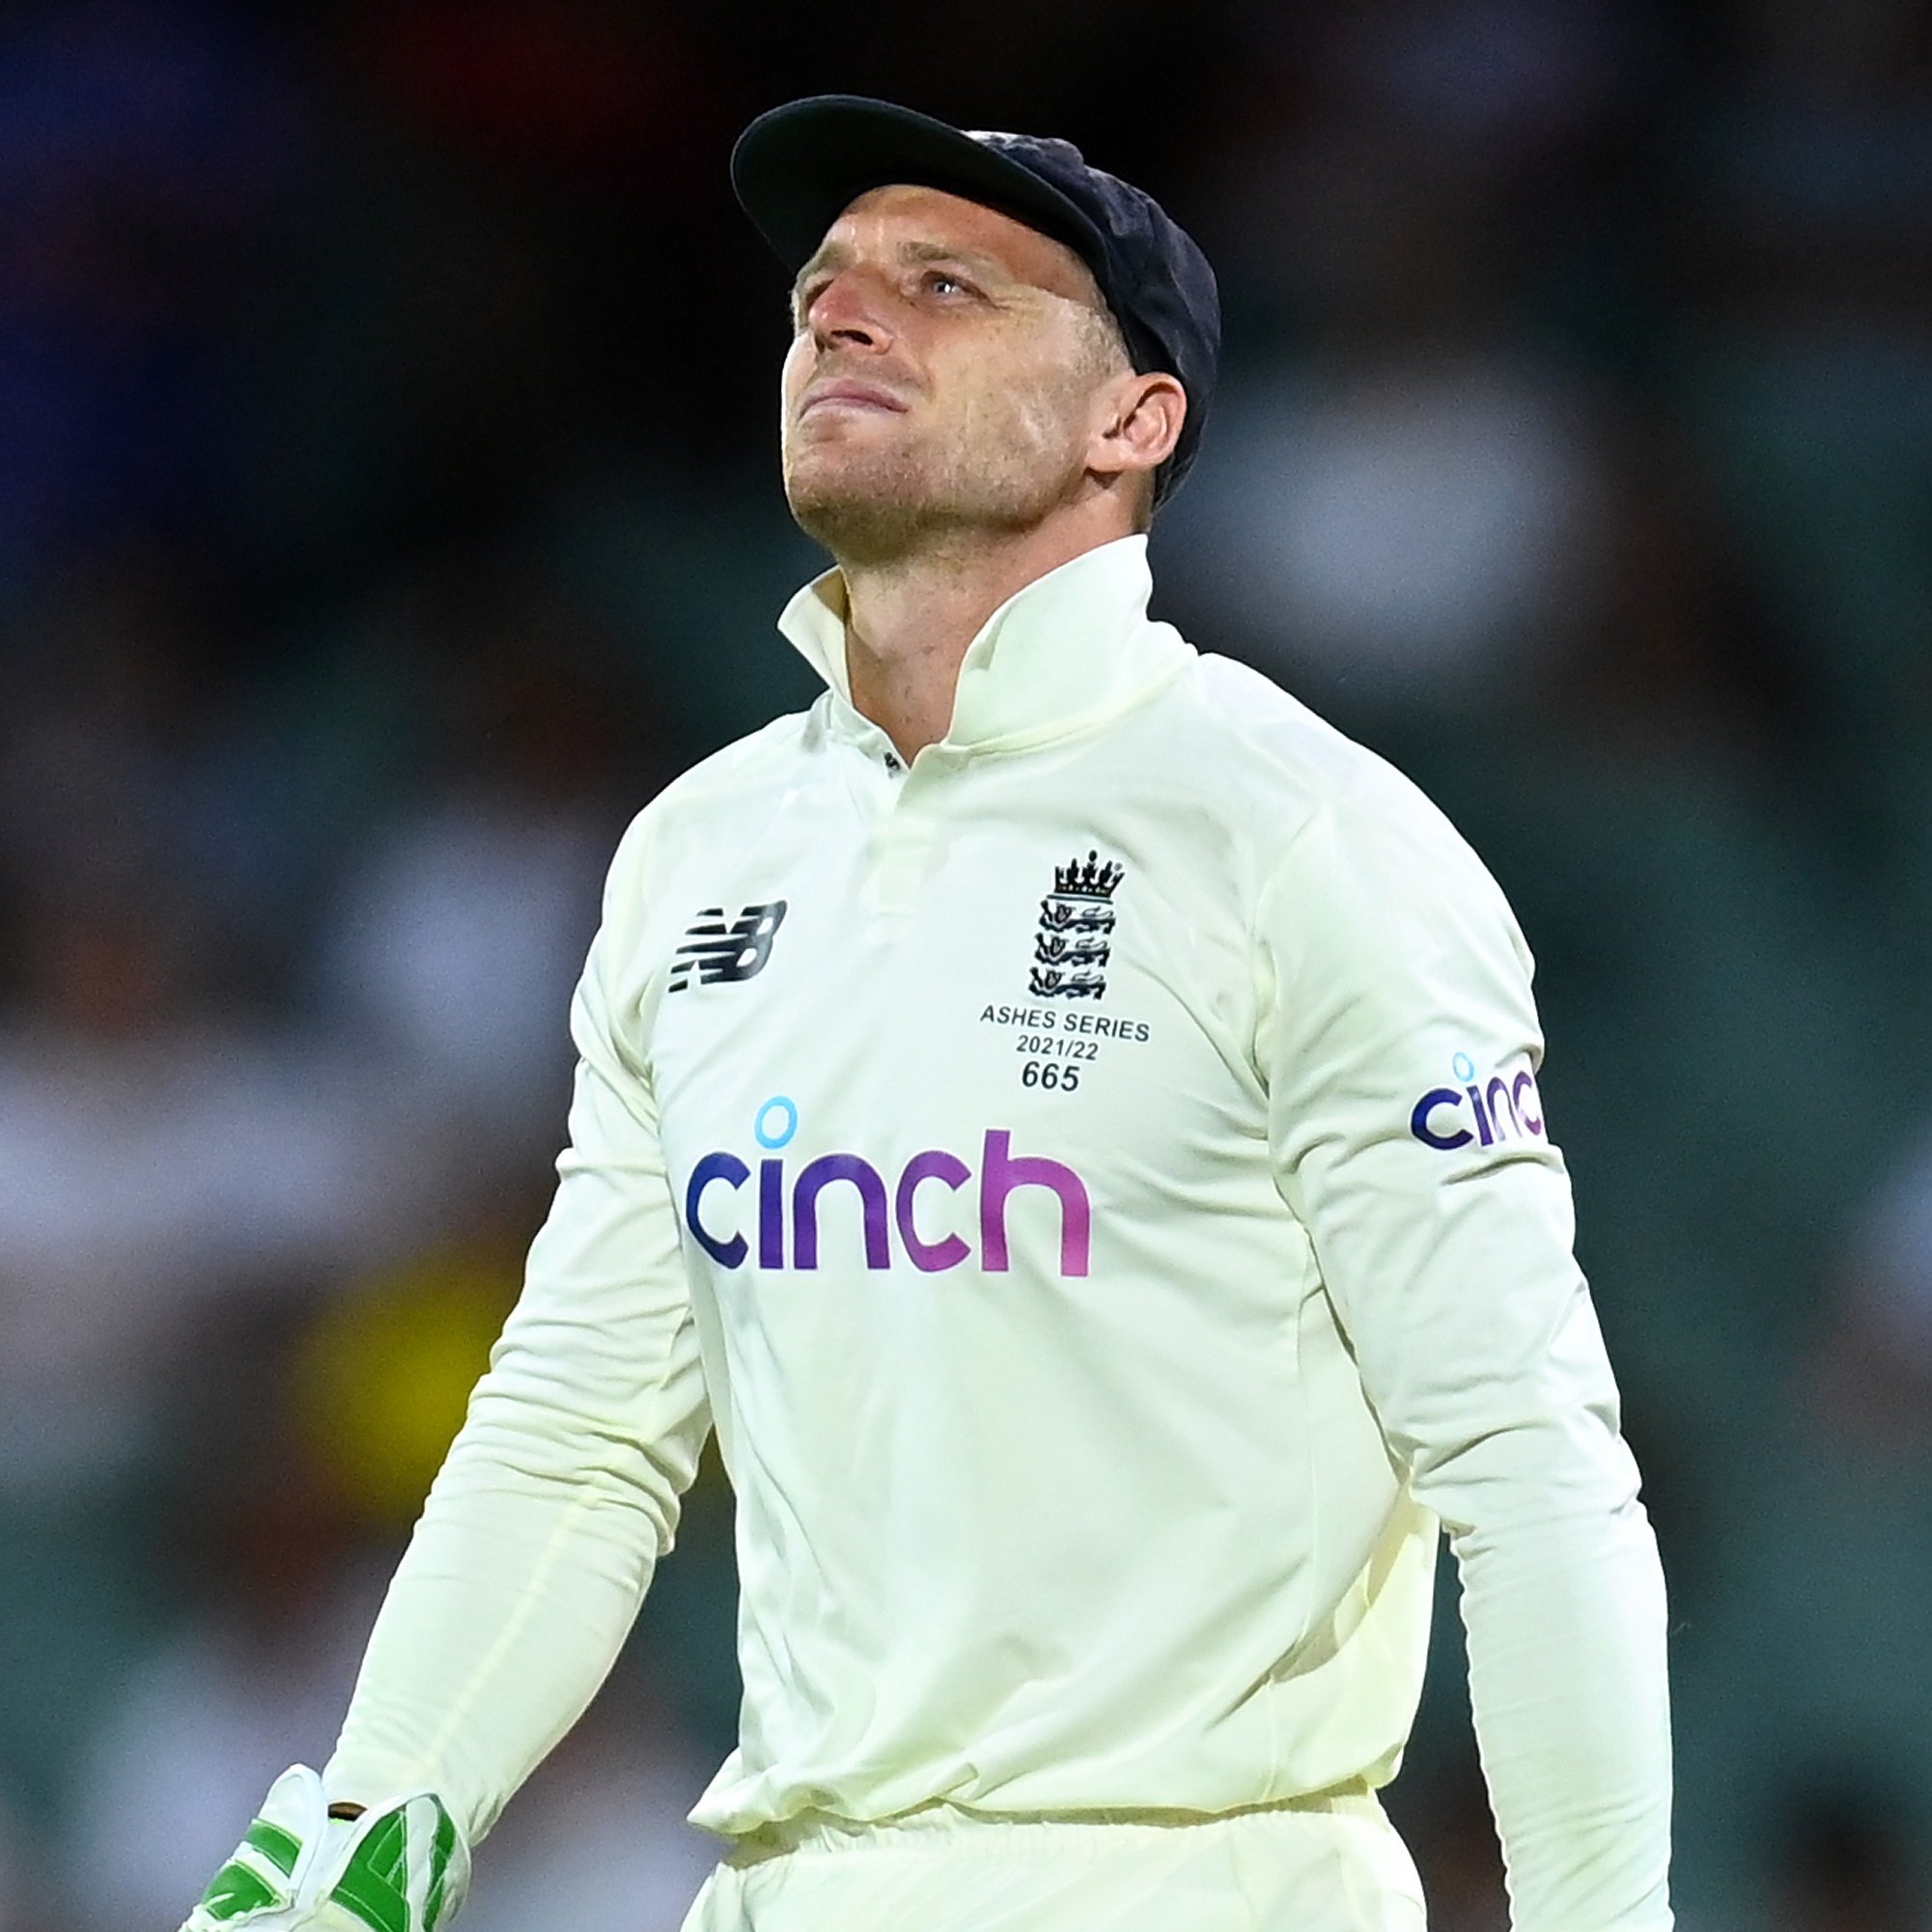 Ashes 2021-22 | WATCH: Jos Buttler drops a sitter to give Marnus Labuschagne a reprieve